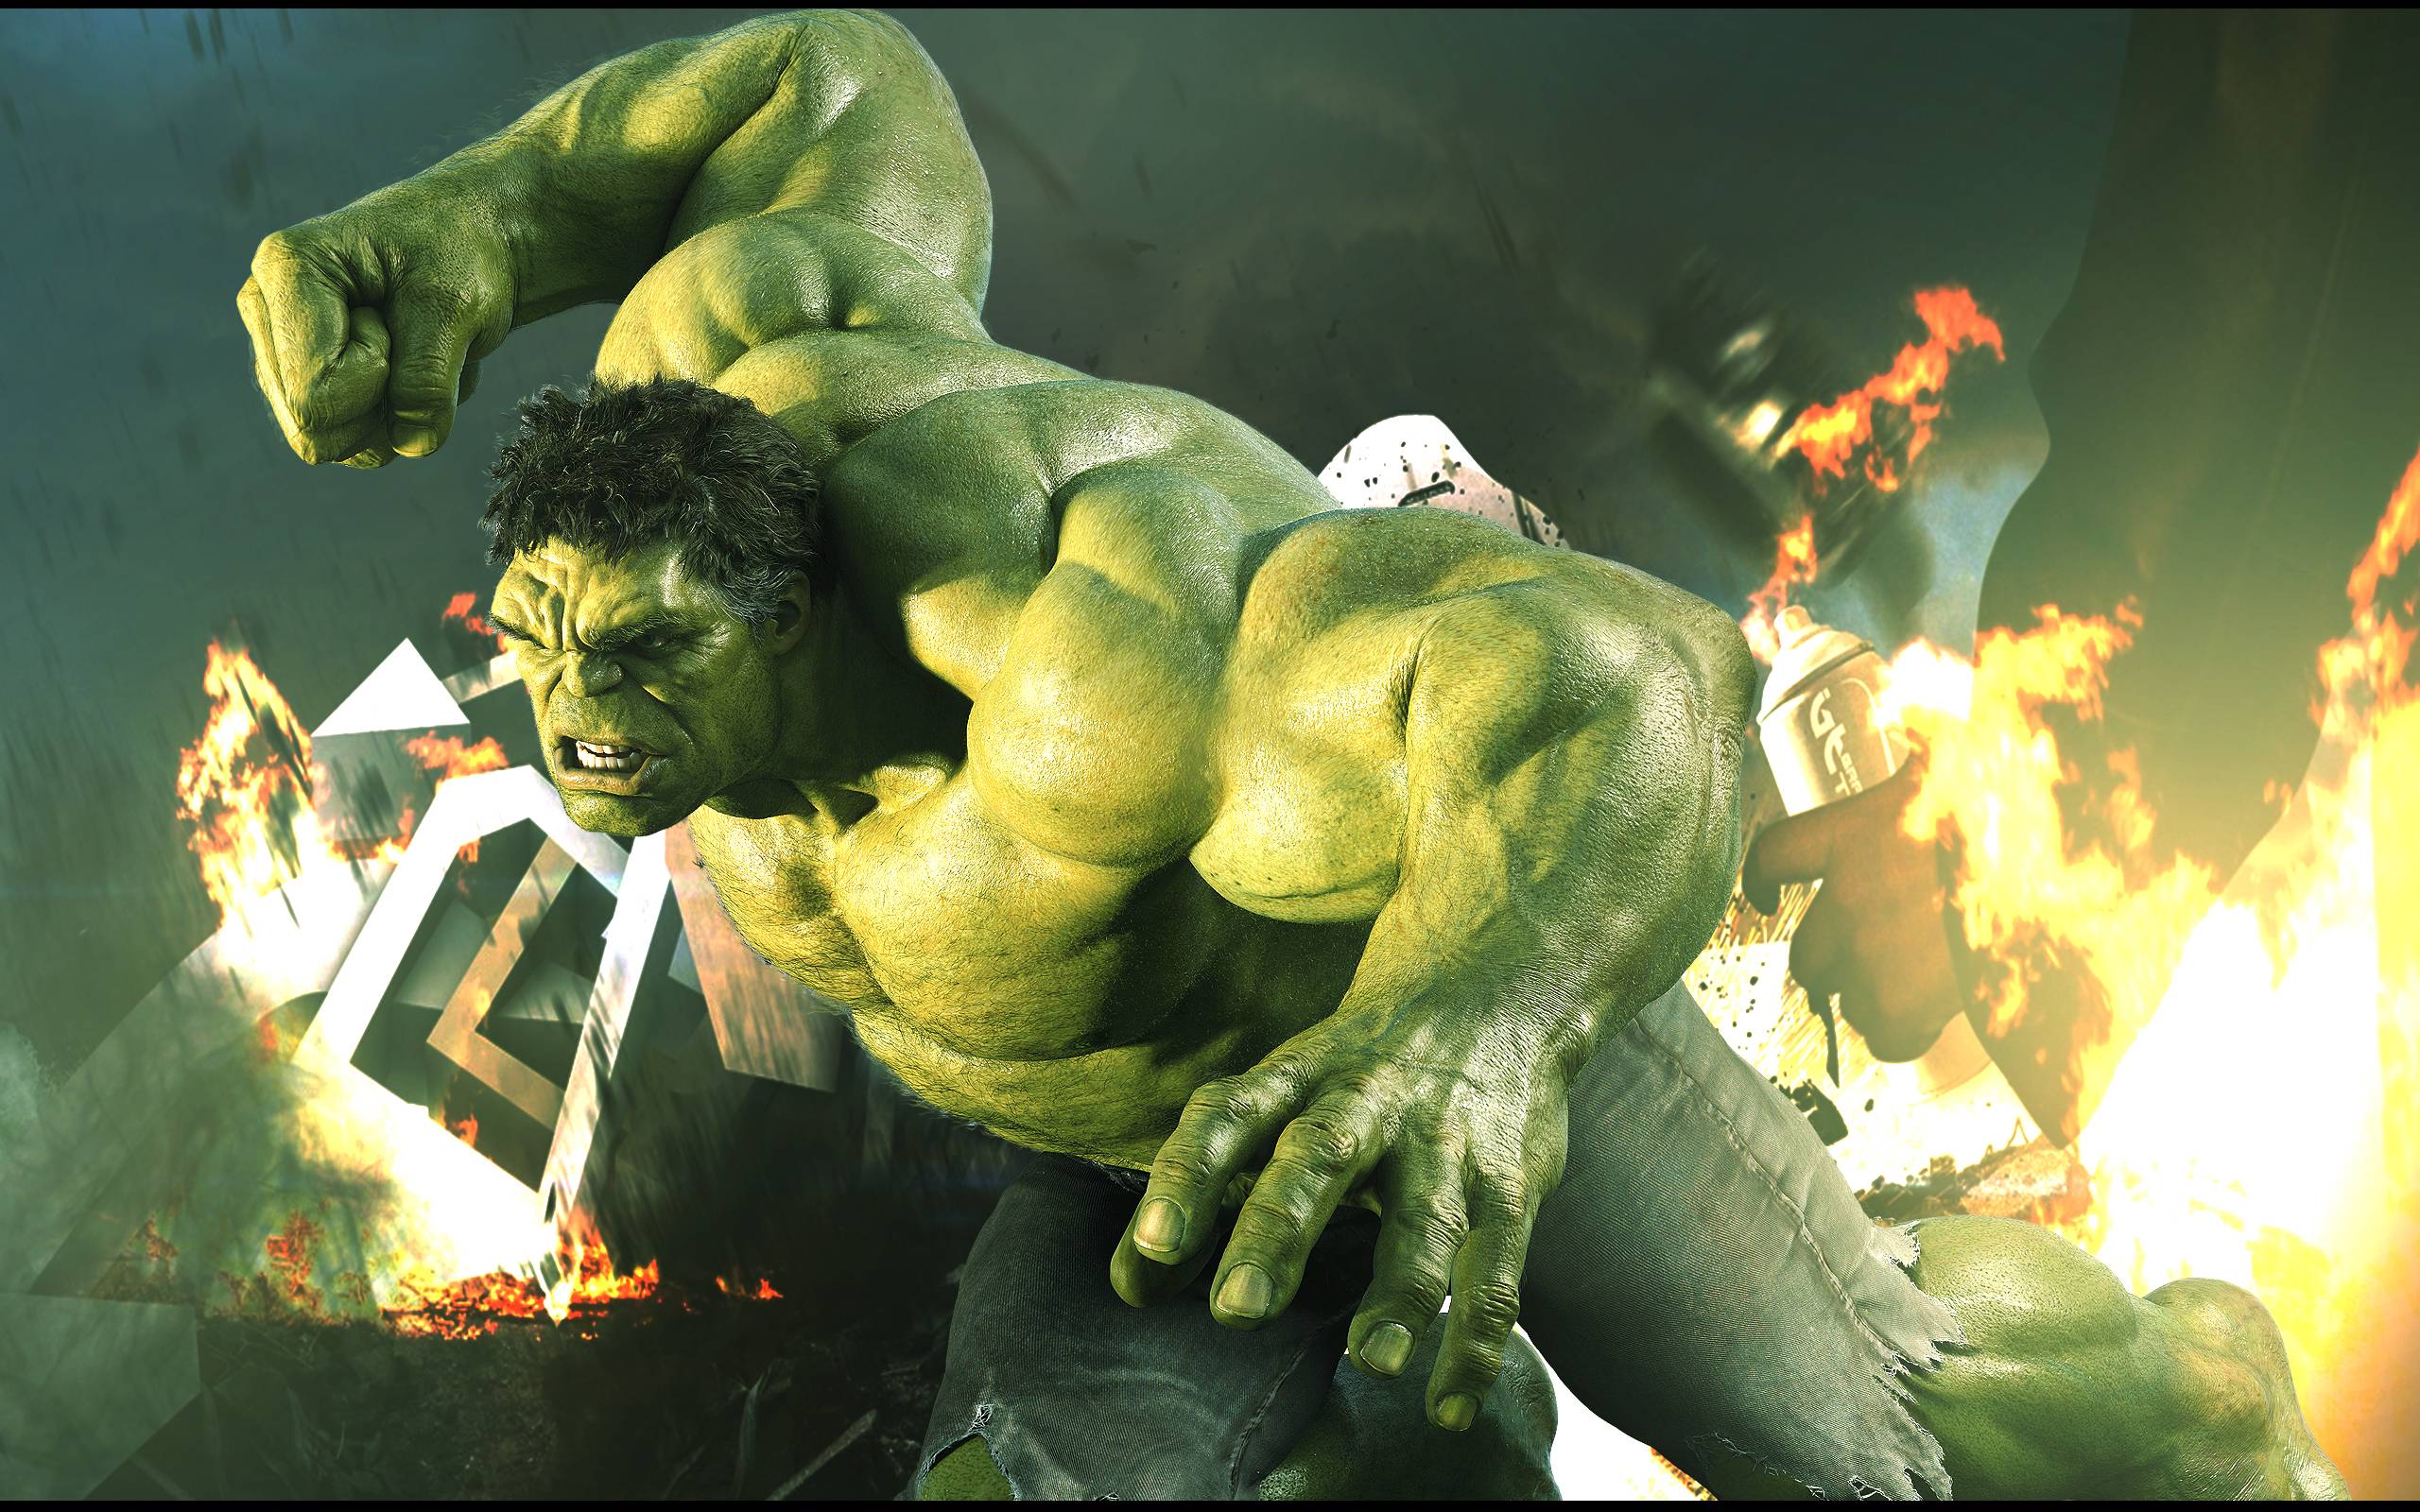 Hulk Backgrounds free download | Wallpapers, Backgrounds, Images ...